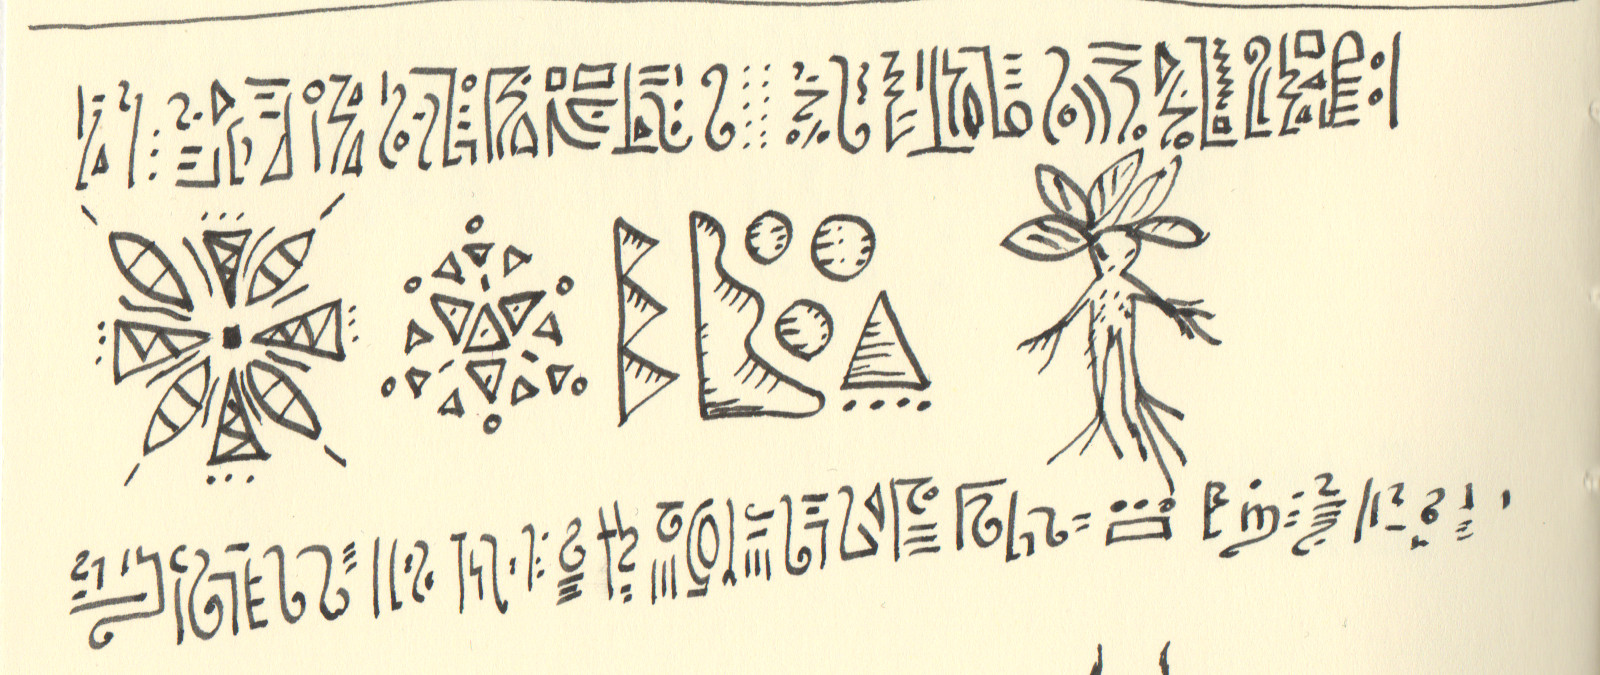 Ink on paper, text-like graphic markings with a mandrake.